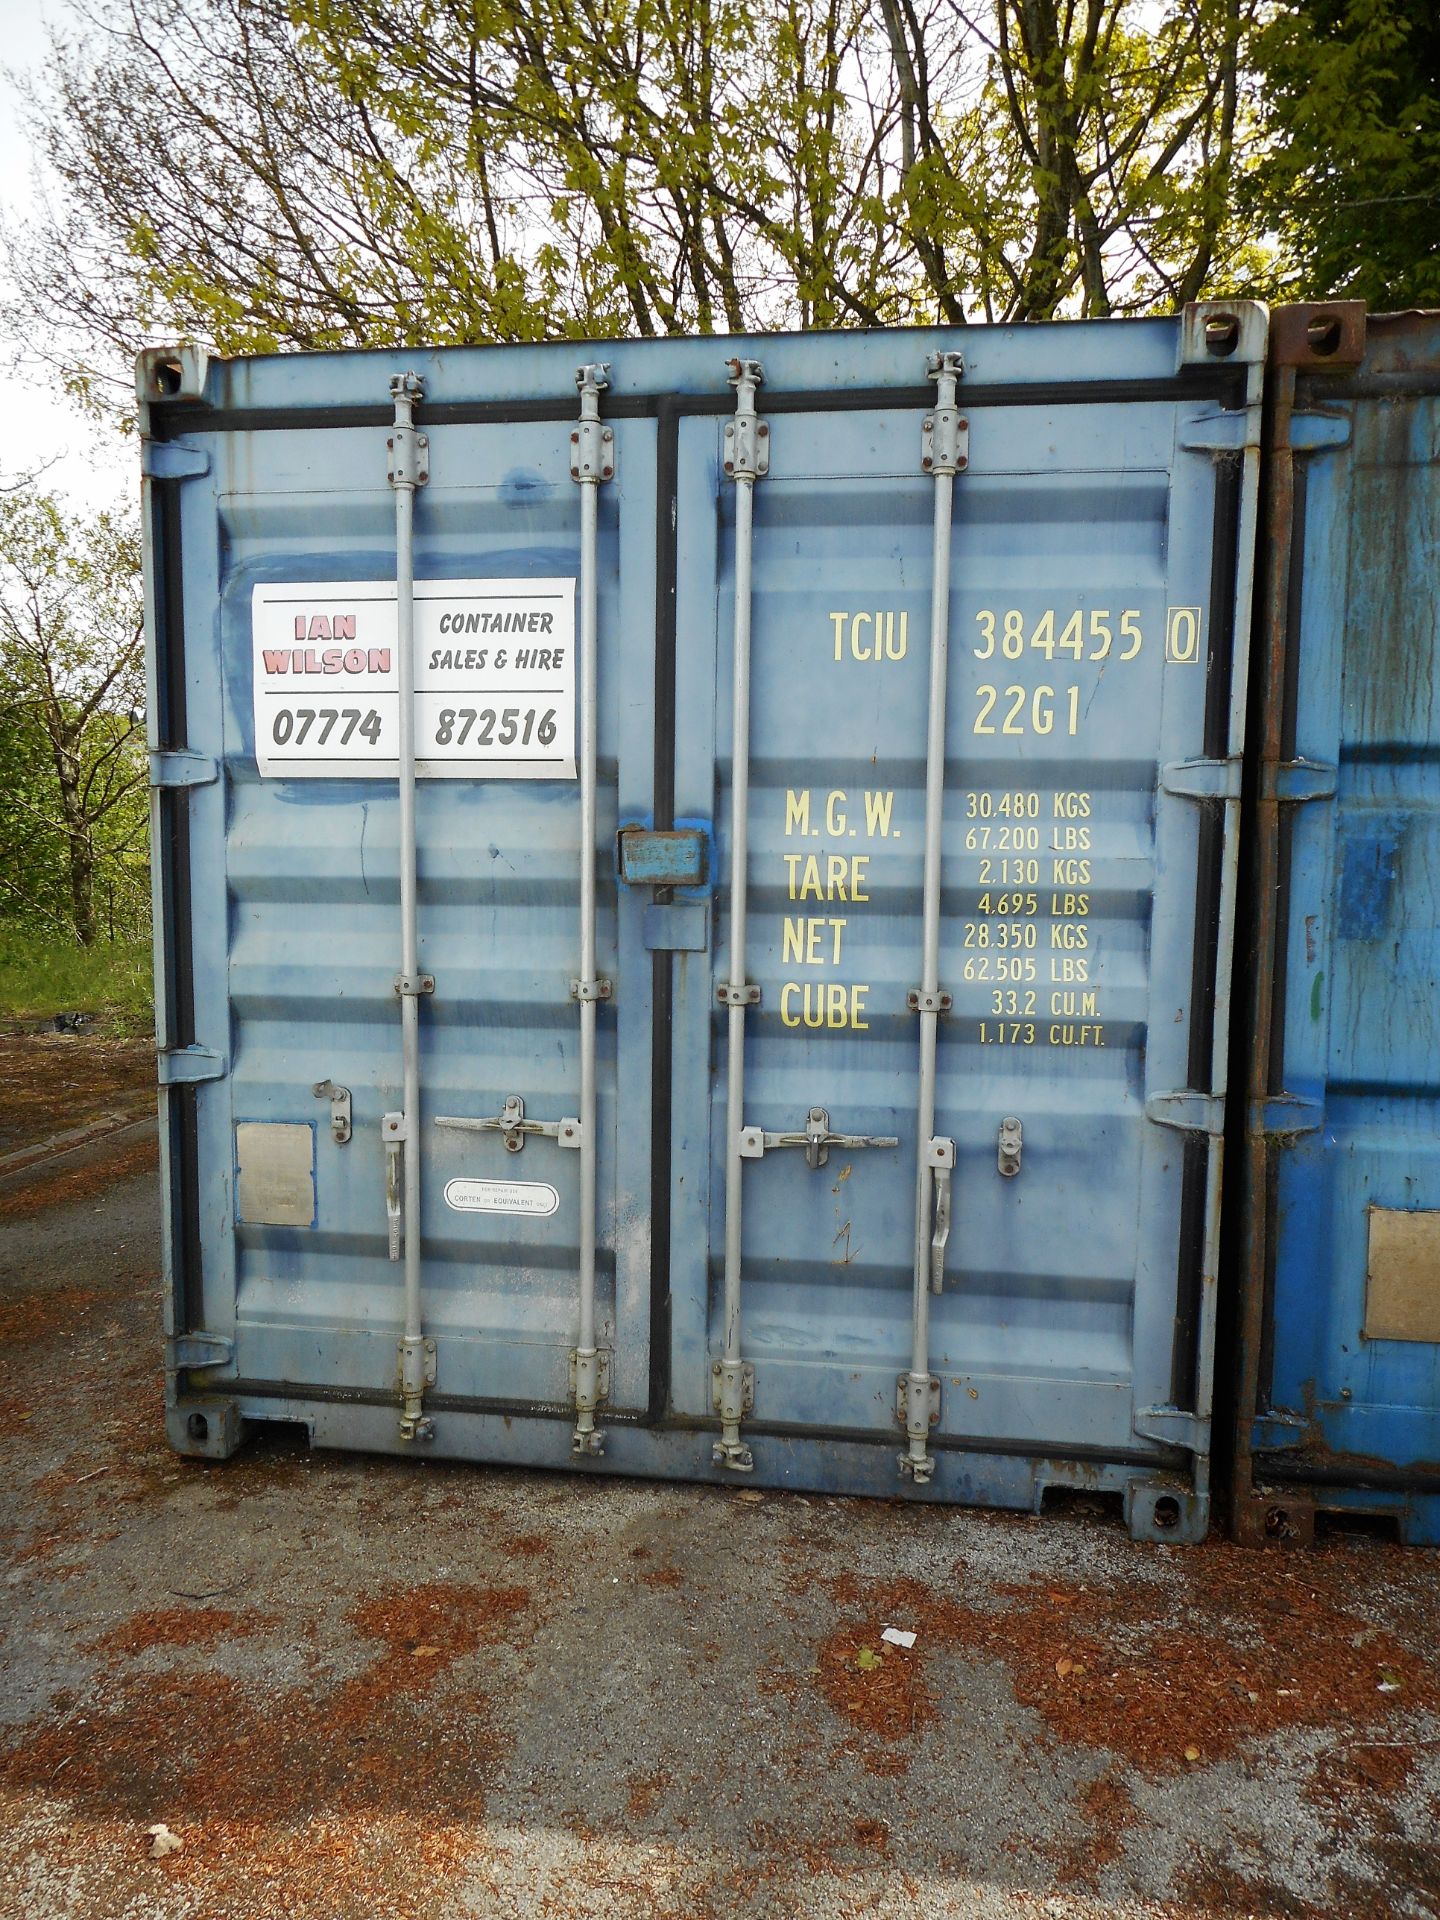 Steel 20ft Shipping Container, MGW 30,480kg, Tare 2,130kg, Net 28,350kg, Cube, 33.2 cu.m, Date of